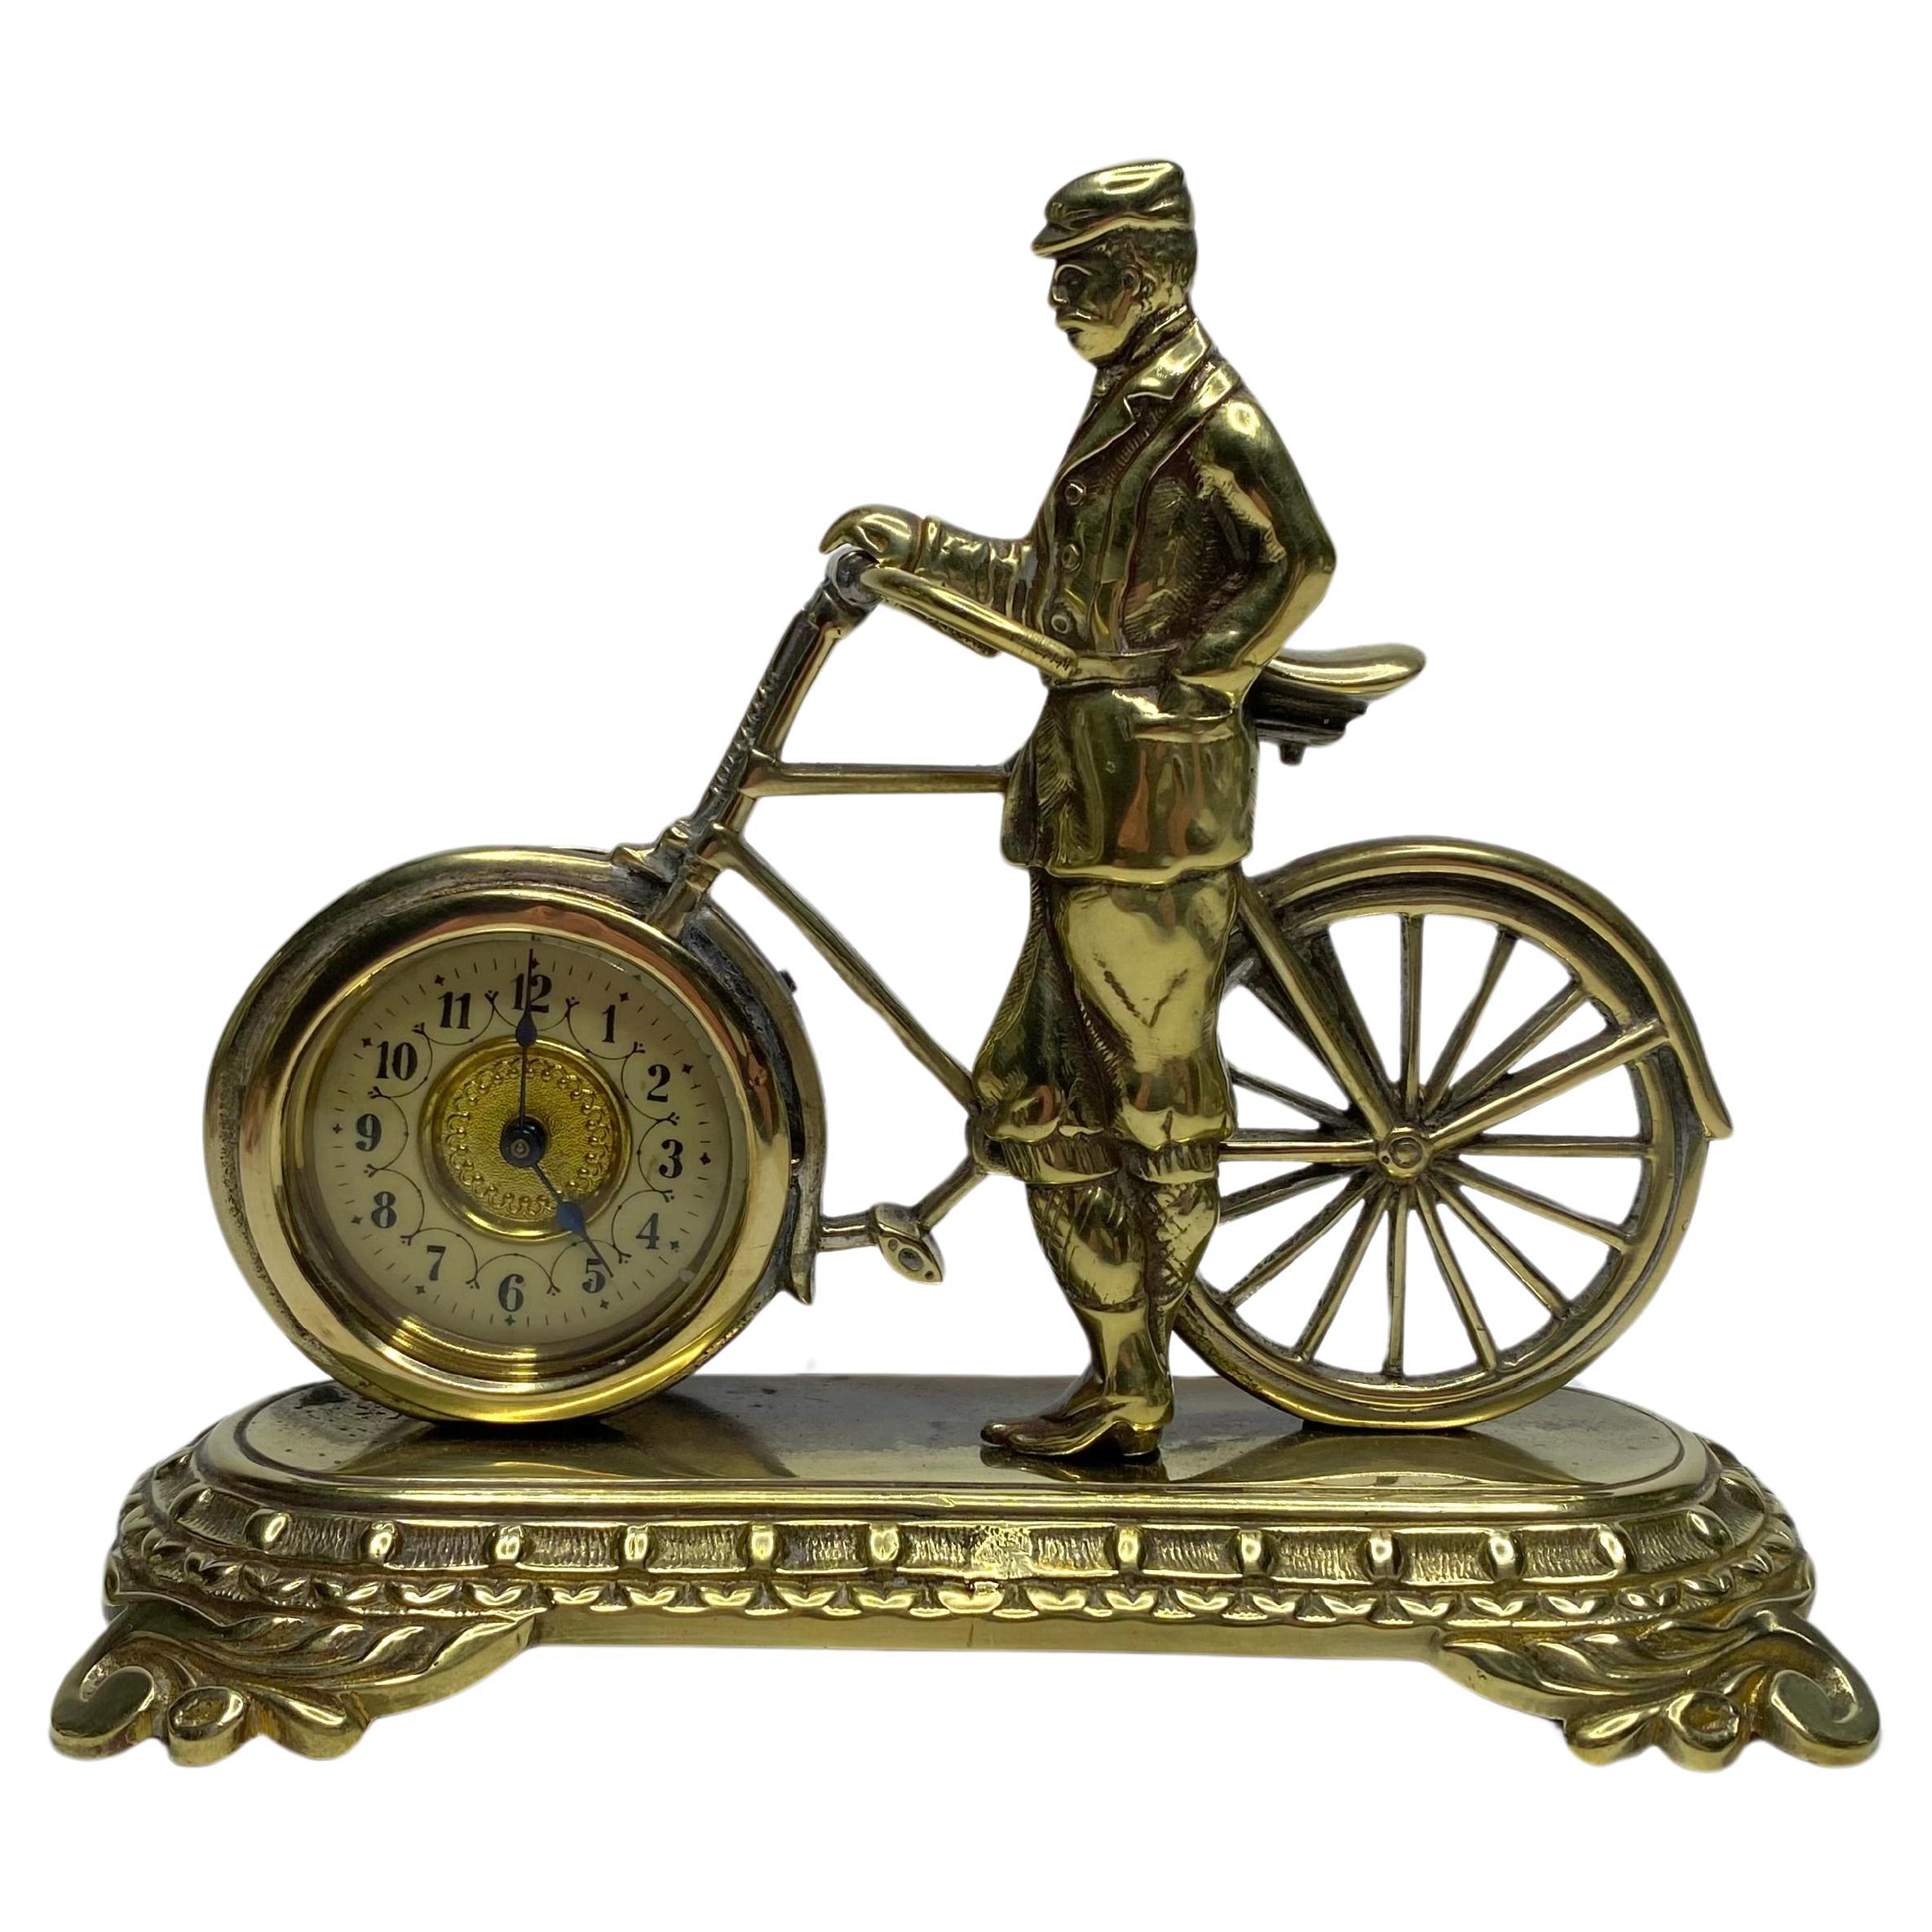 Brass cyclist and bicycle clock, England, c. 1910.